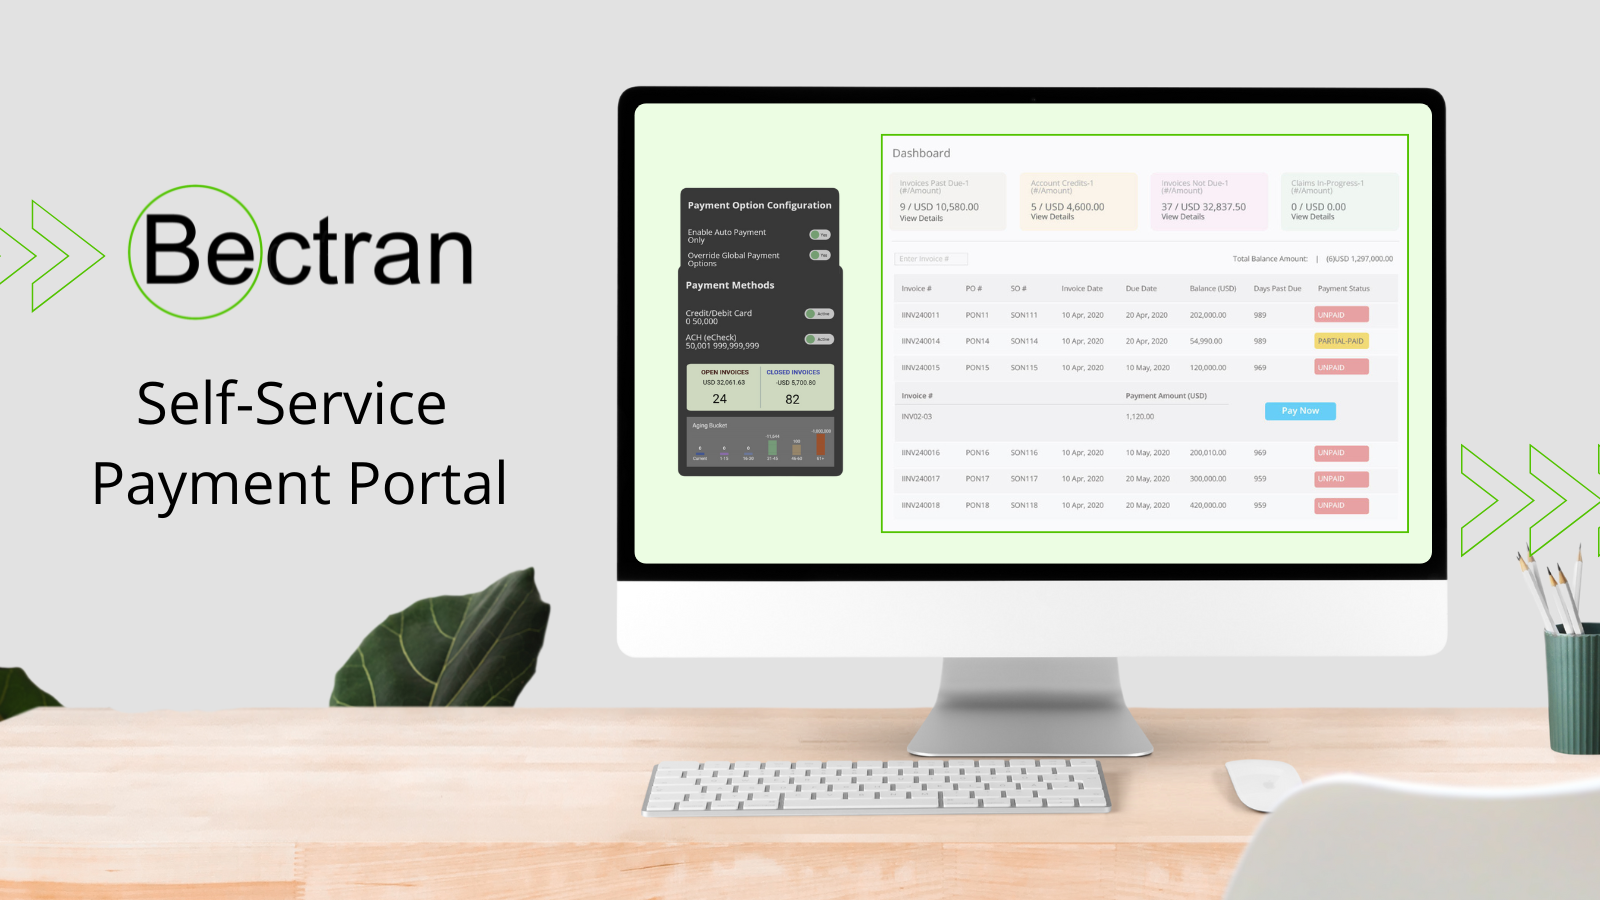 Bectran Unveils Consolidated Payments for its Self-Service Payment Portal